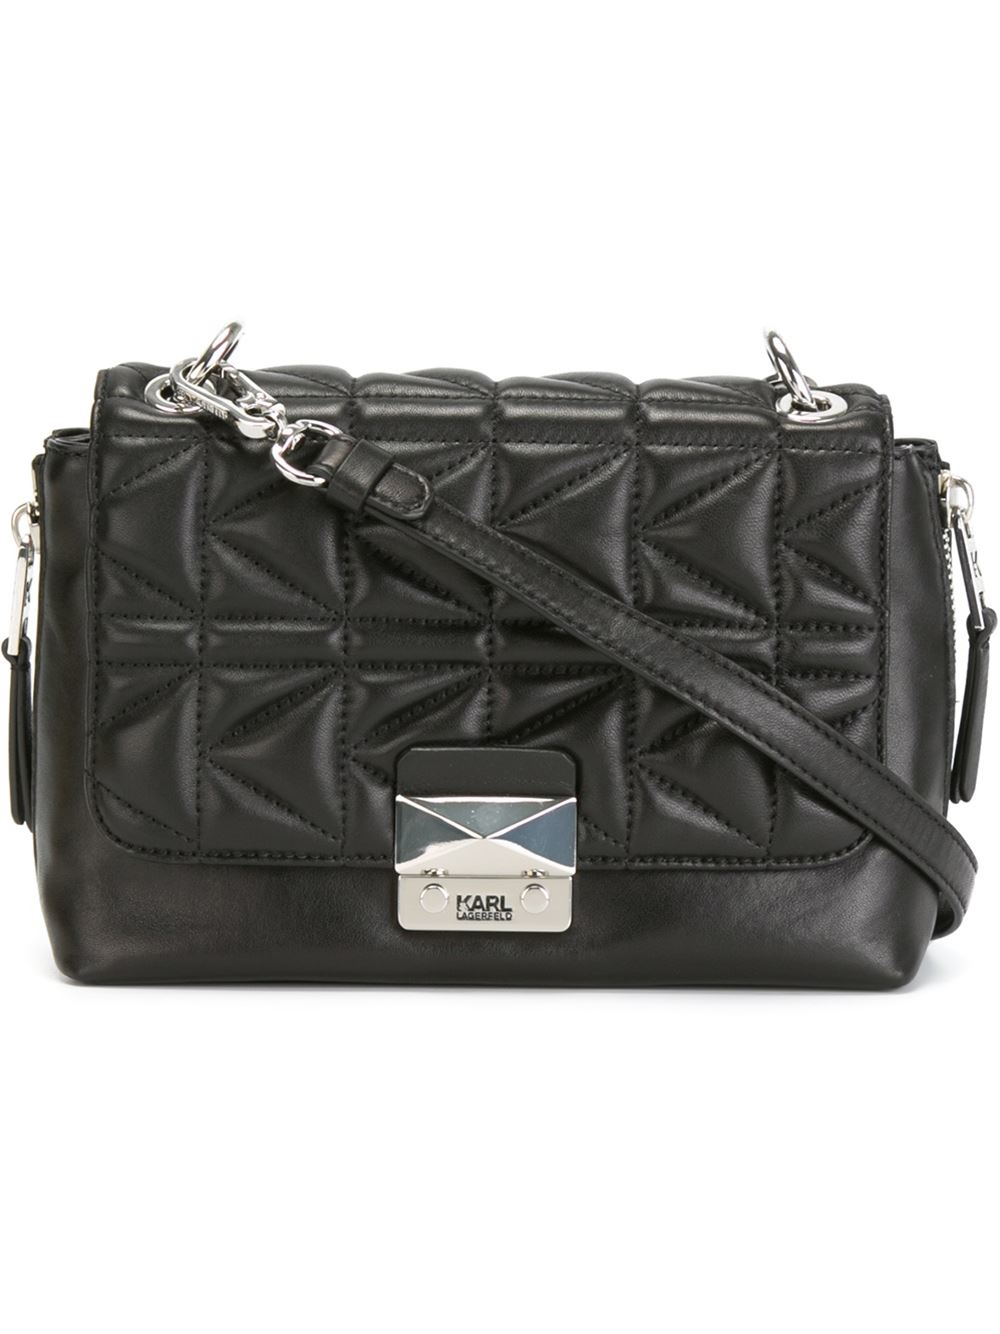 Lyst - Karl Lagerfeld Quilted Crossbody Bag in Black